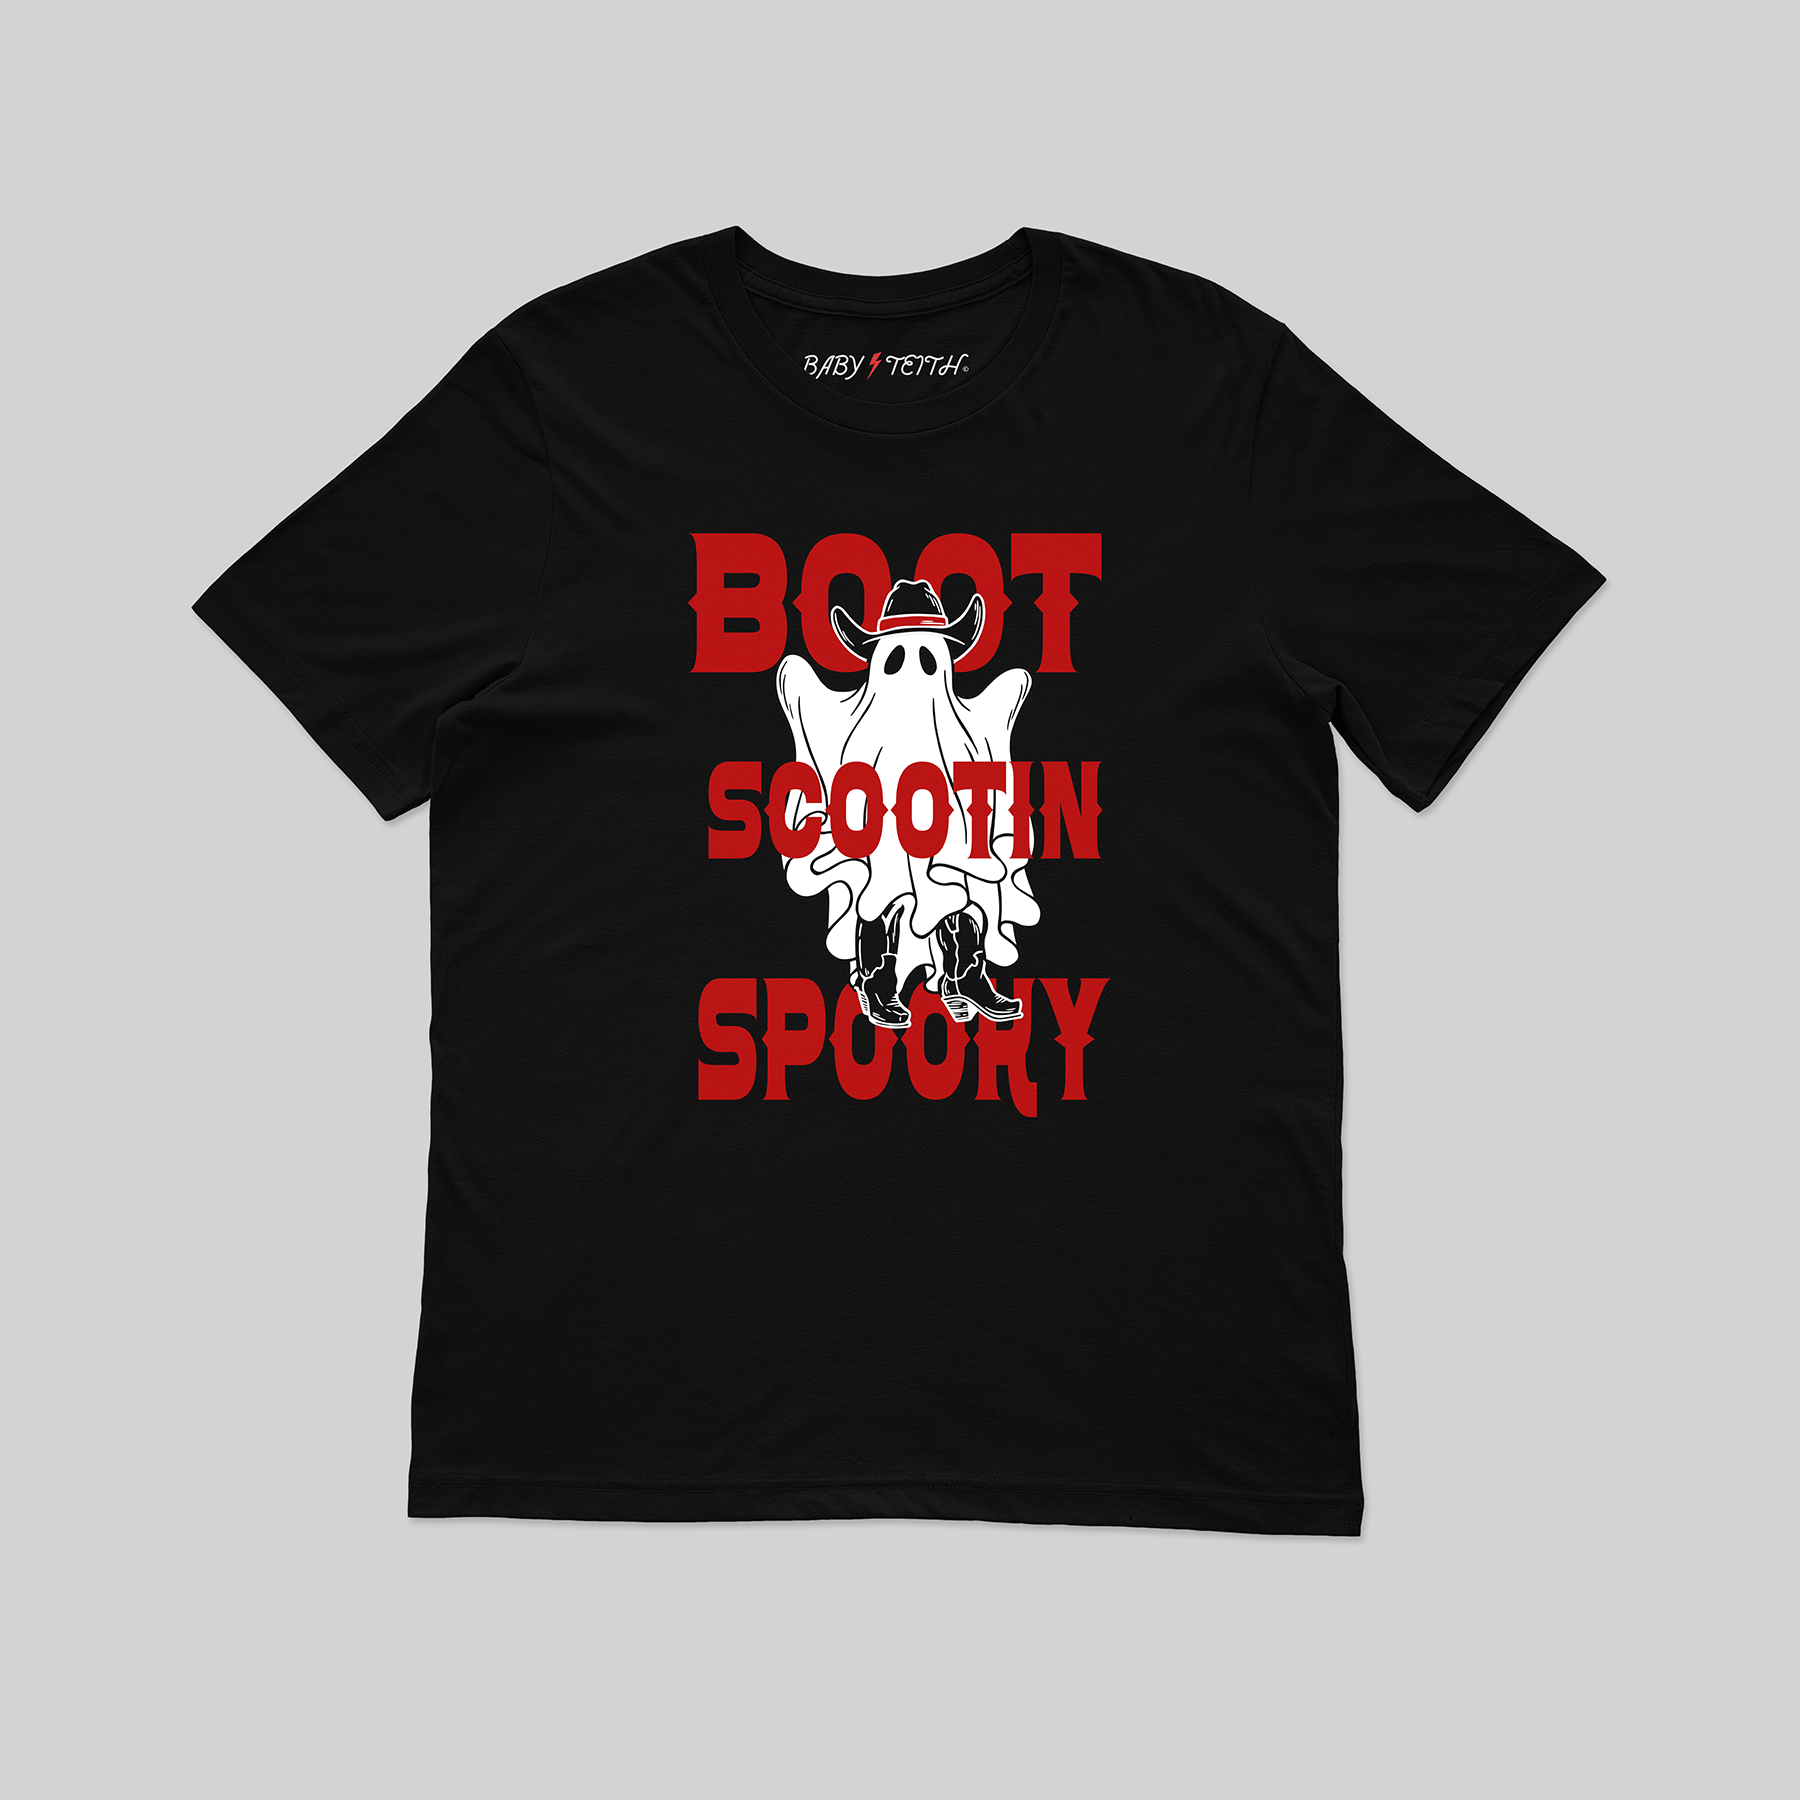 Boot Scootin Spooky Unisex Tee for Adults